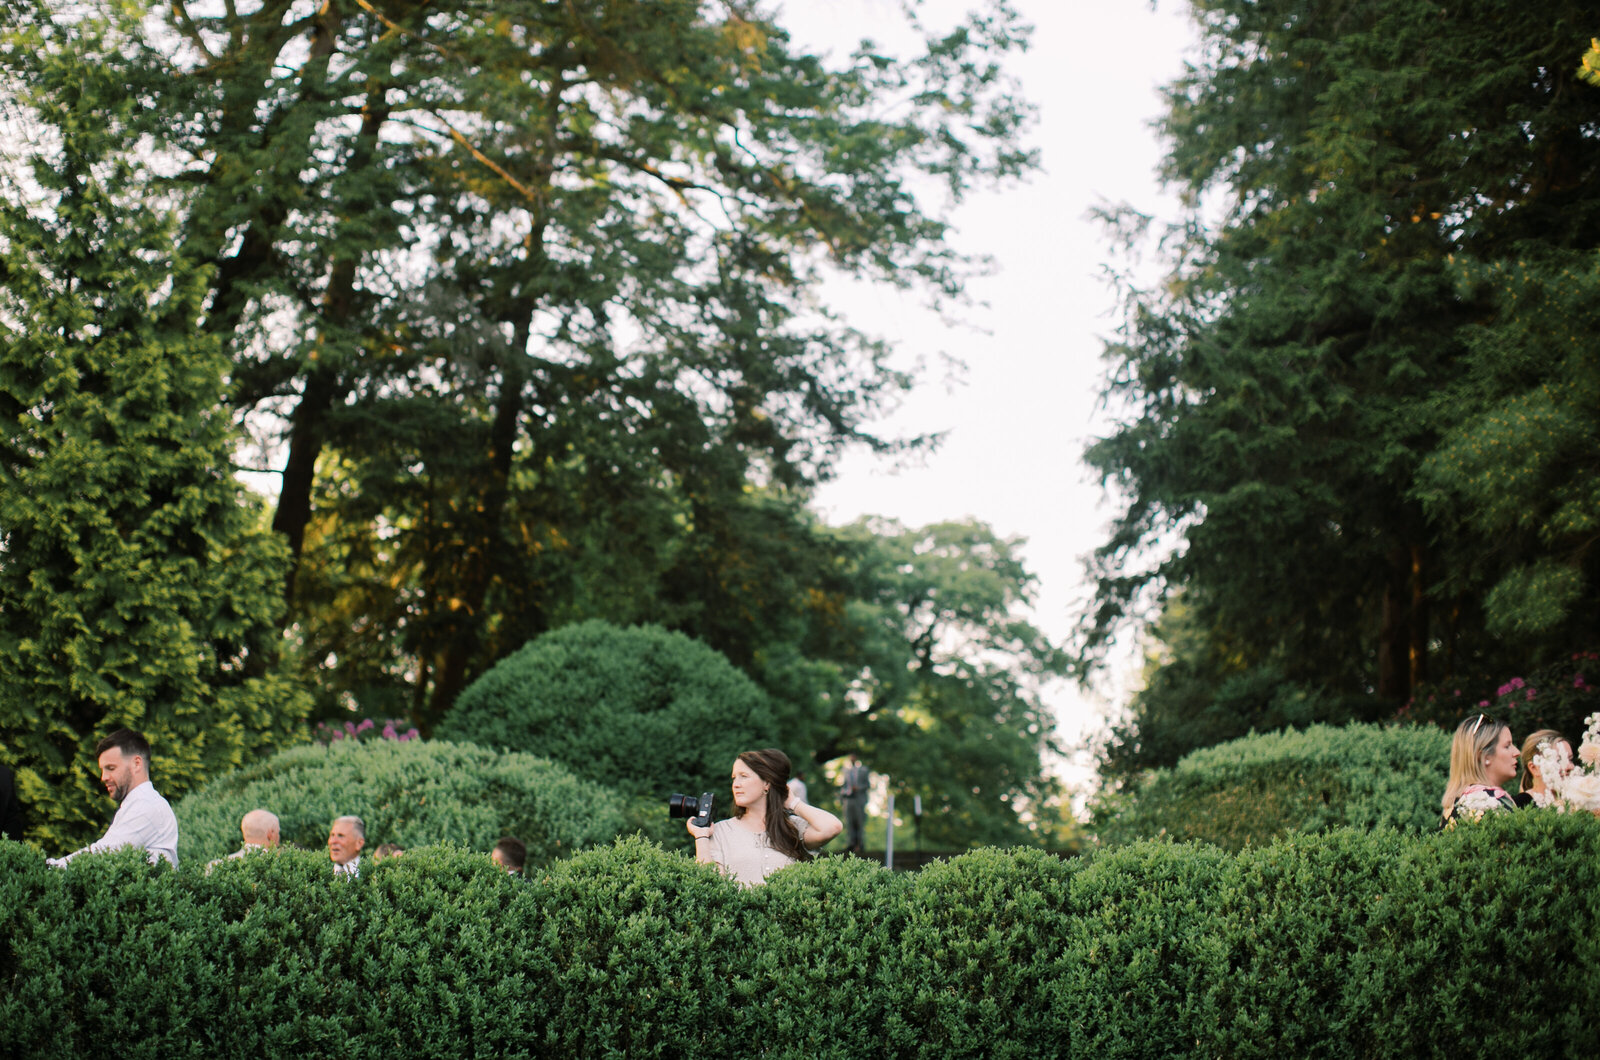 outdoor wedding ceremony with greenery and guests walking around